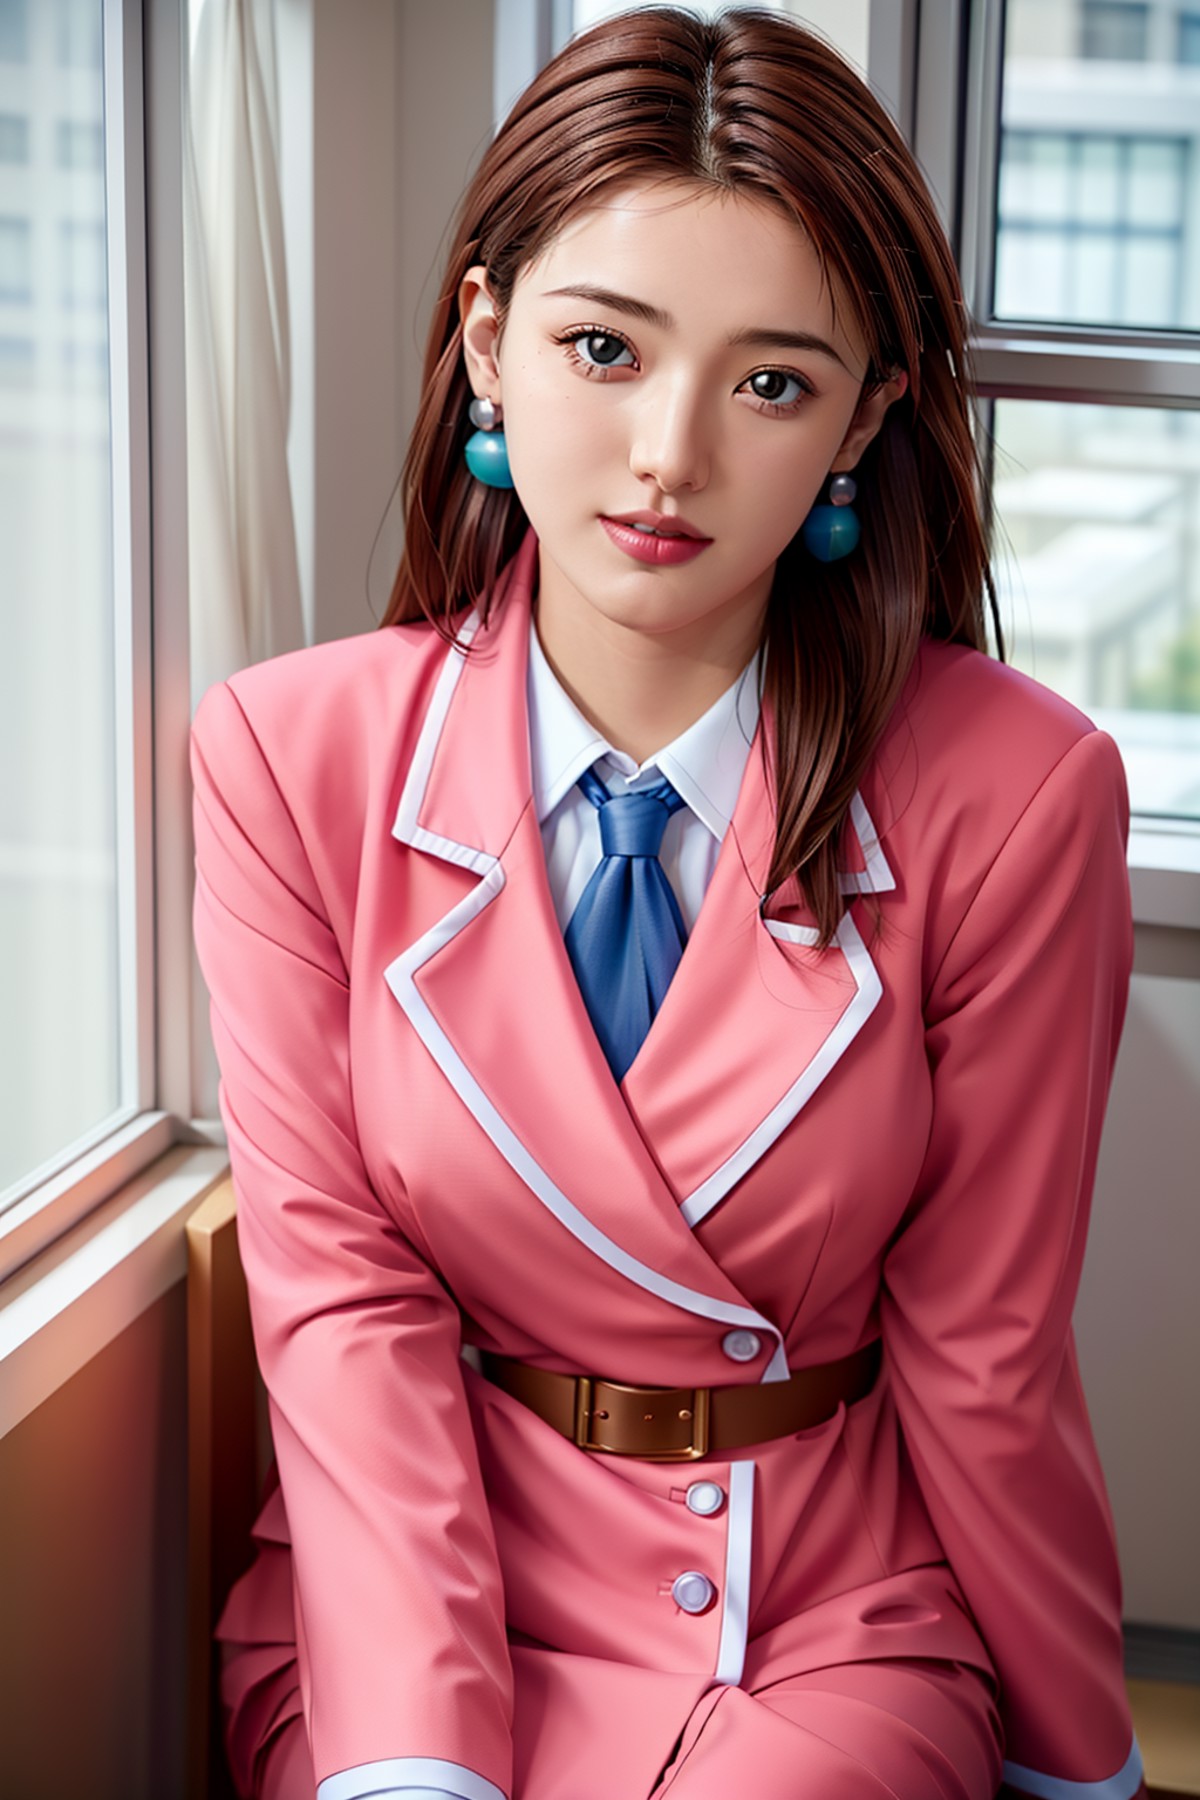 (day),school,classroom, windows,
dynamic pose, standing at attention,
pink pencil skirt, pink jacket,collared shirt, white...